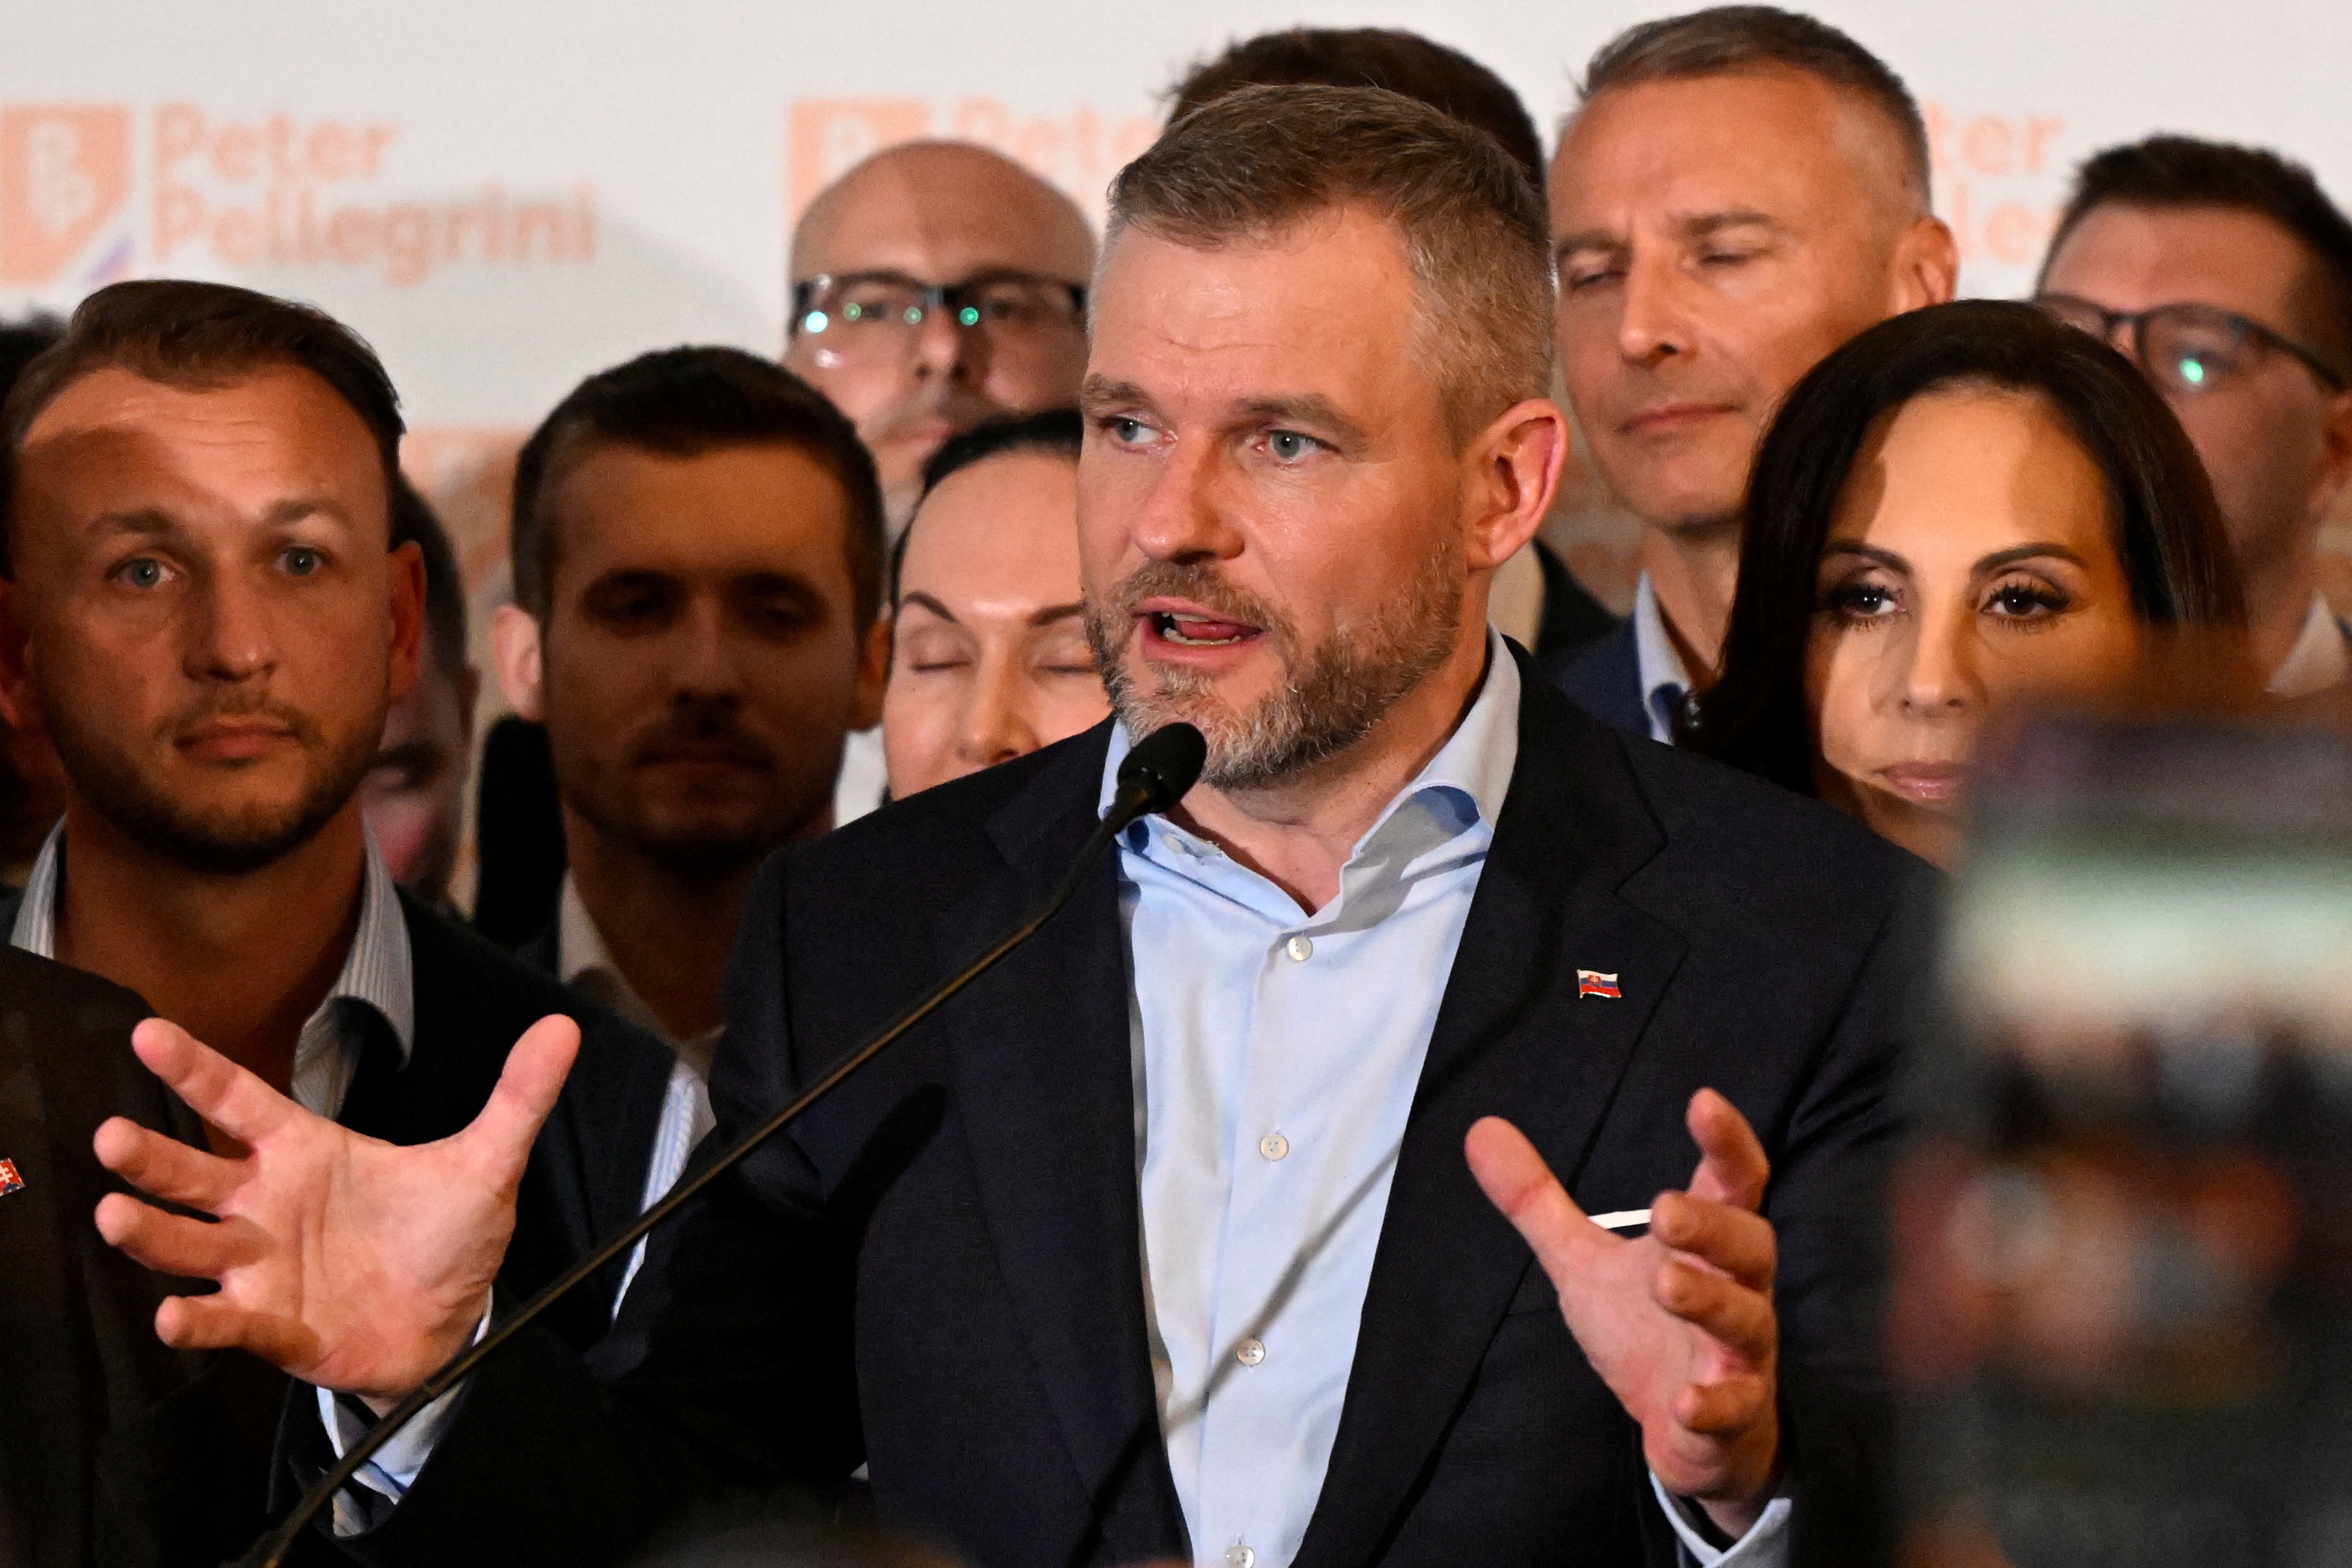 Slovakia holds presidential election run-off